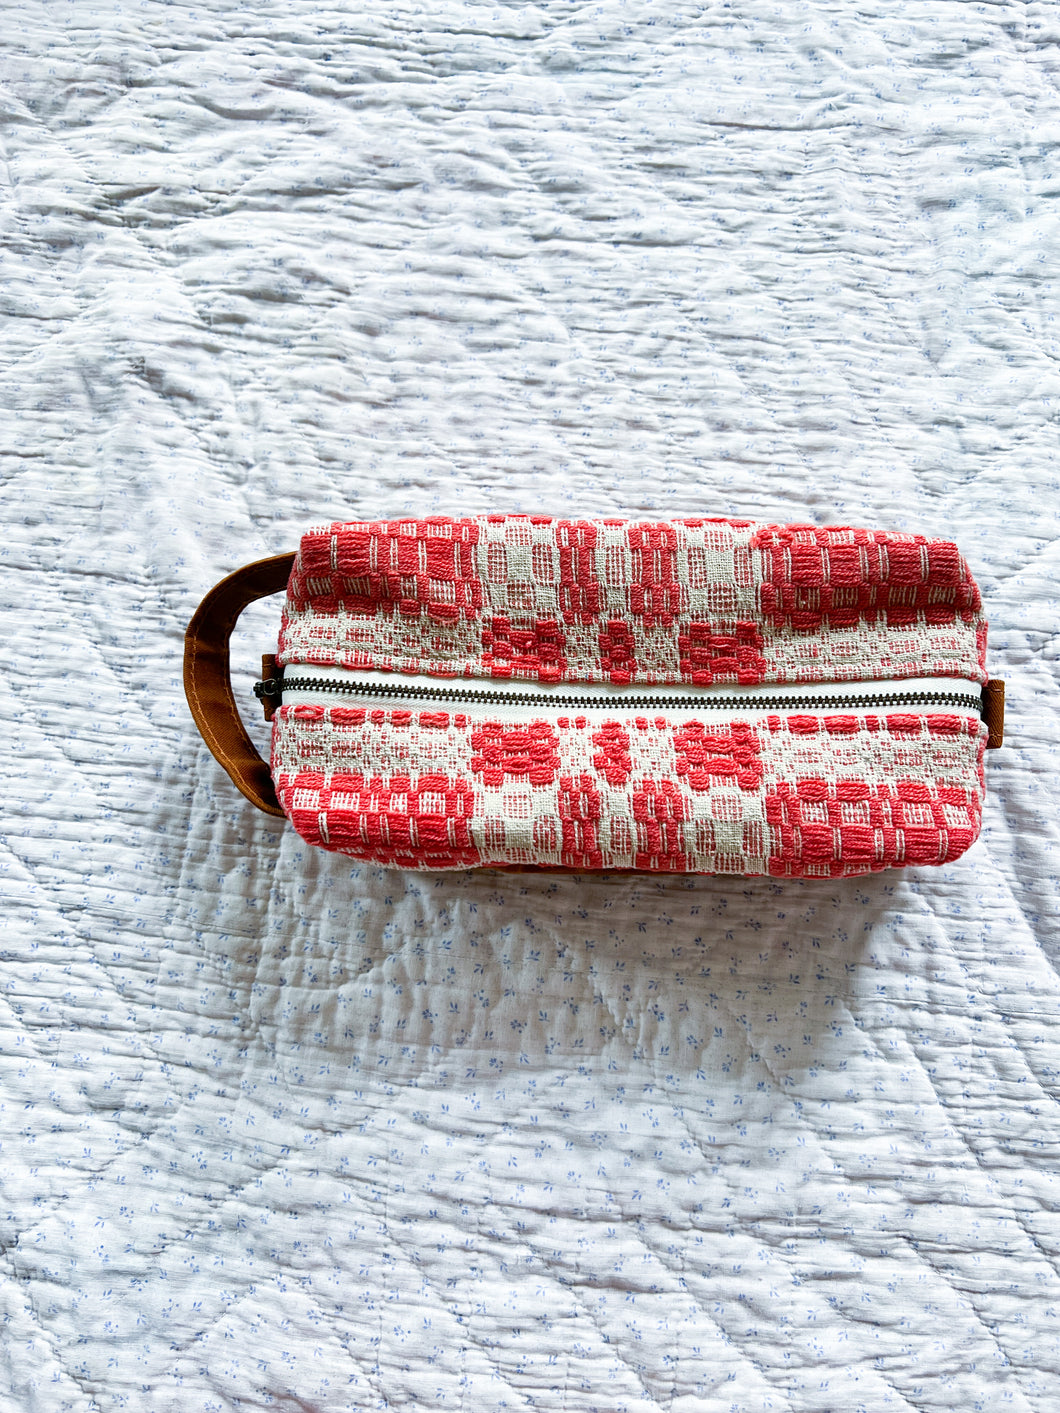 One-of-a-Kind: Coverlet Travel Pocket #4 (cotton lined)